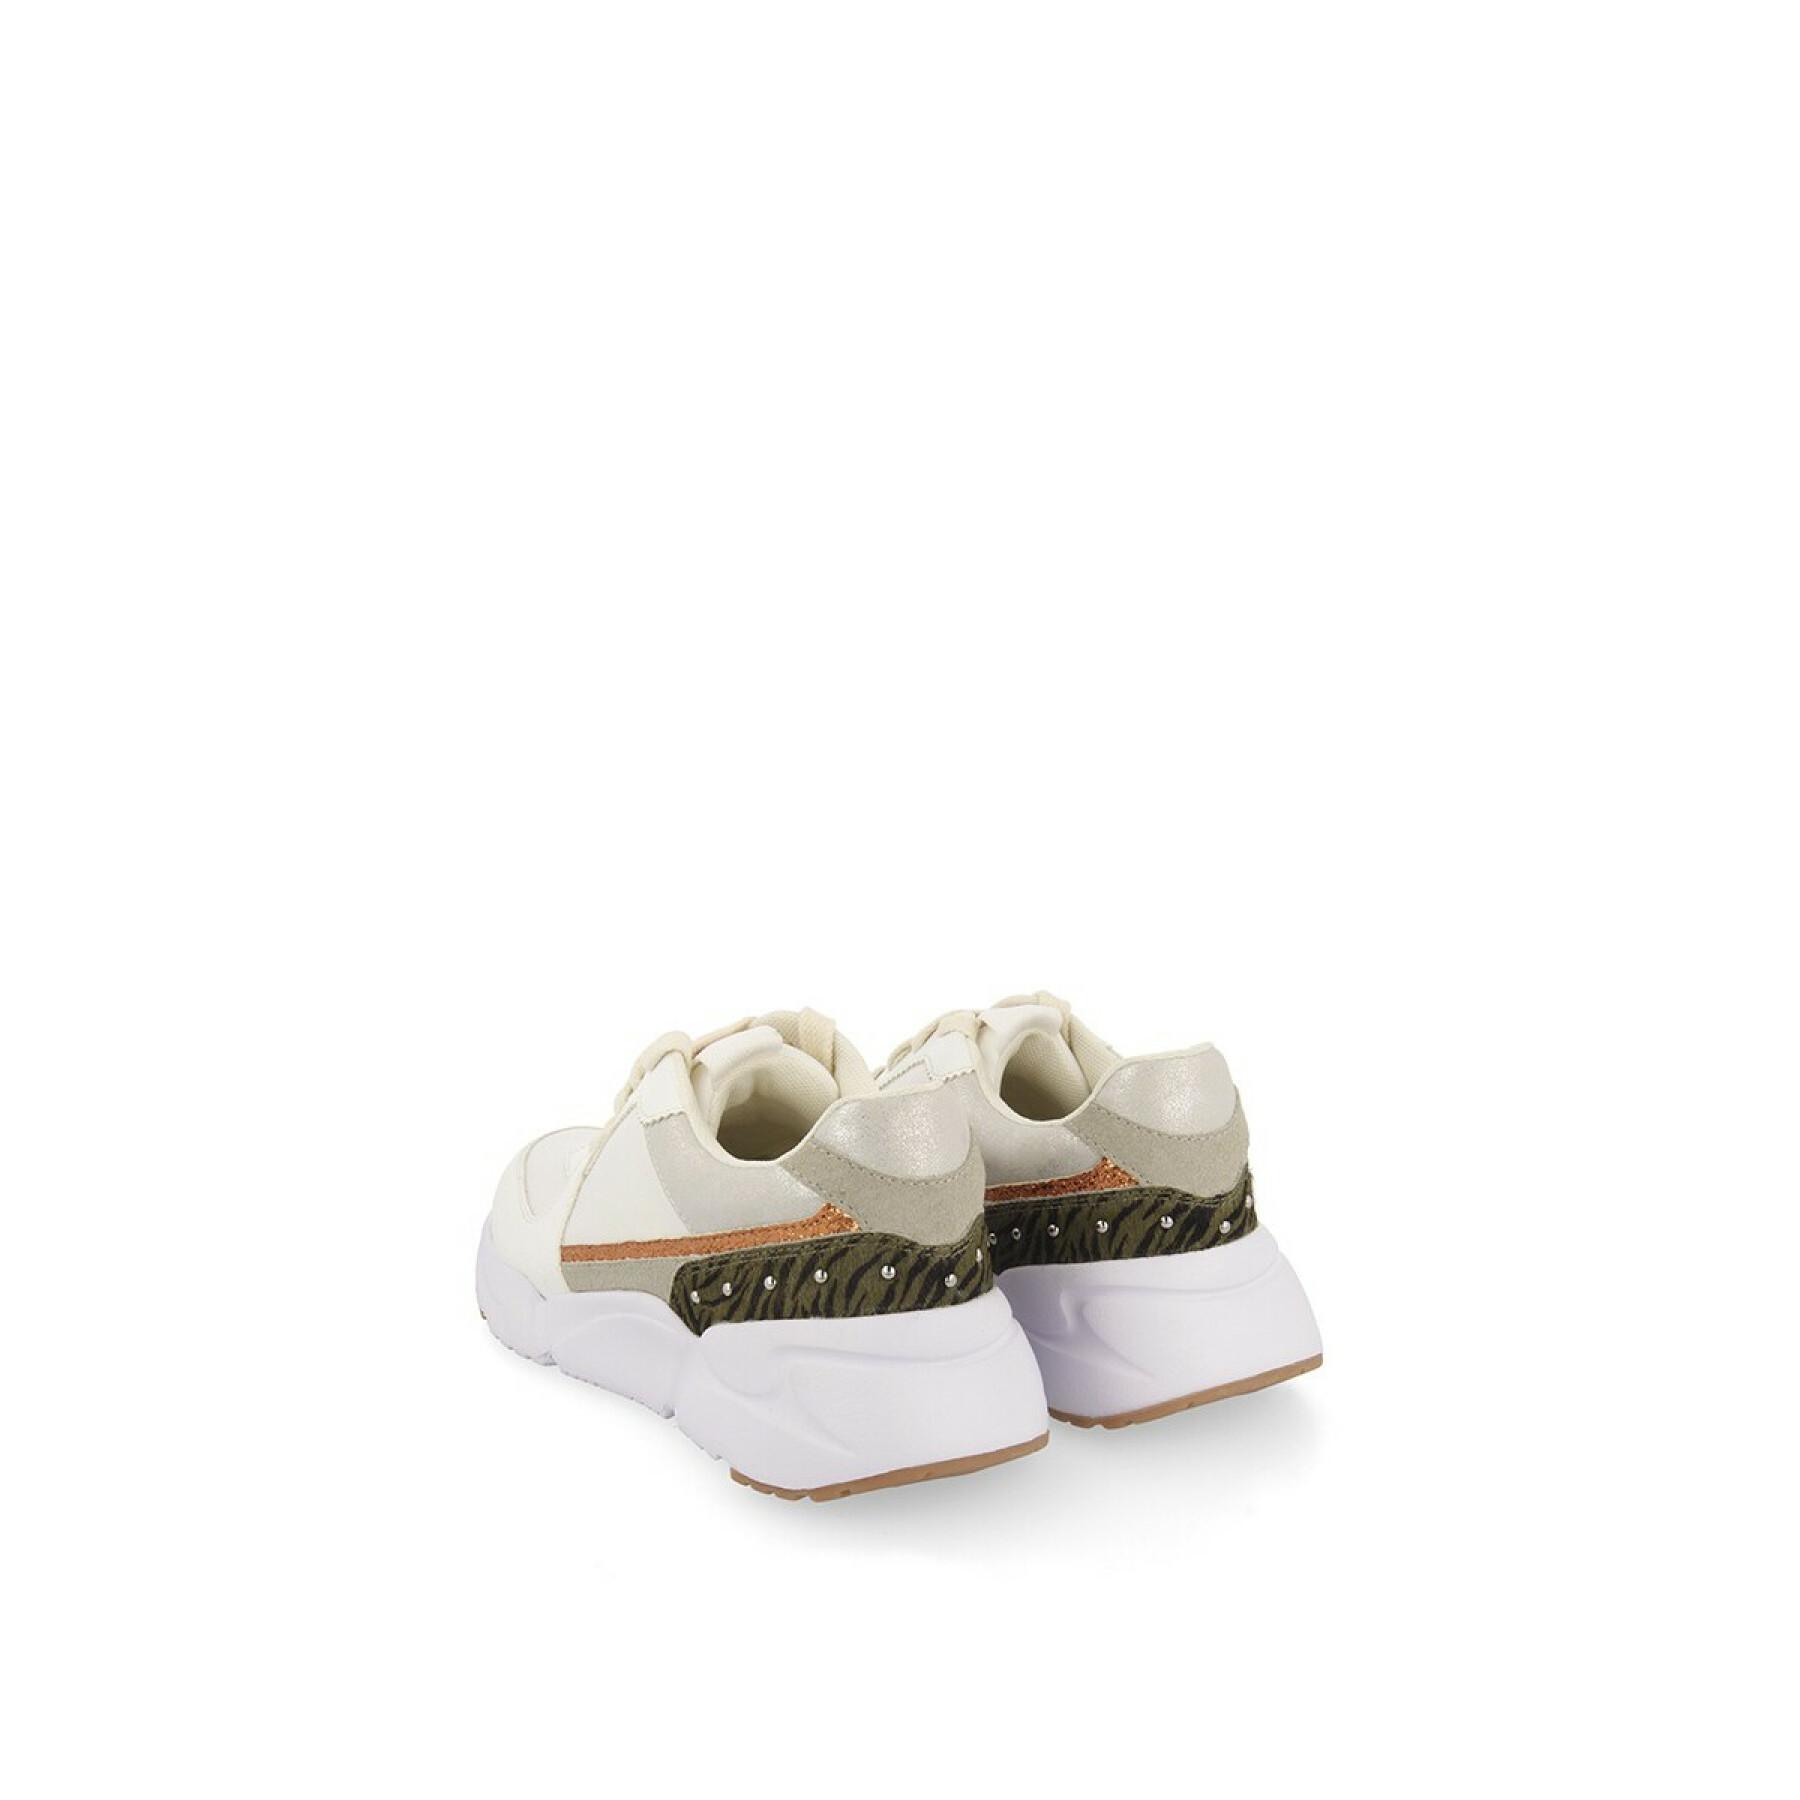 Women's sneakers Gioseppo Lusby